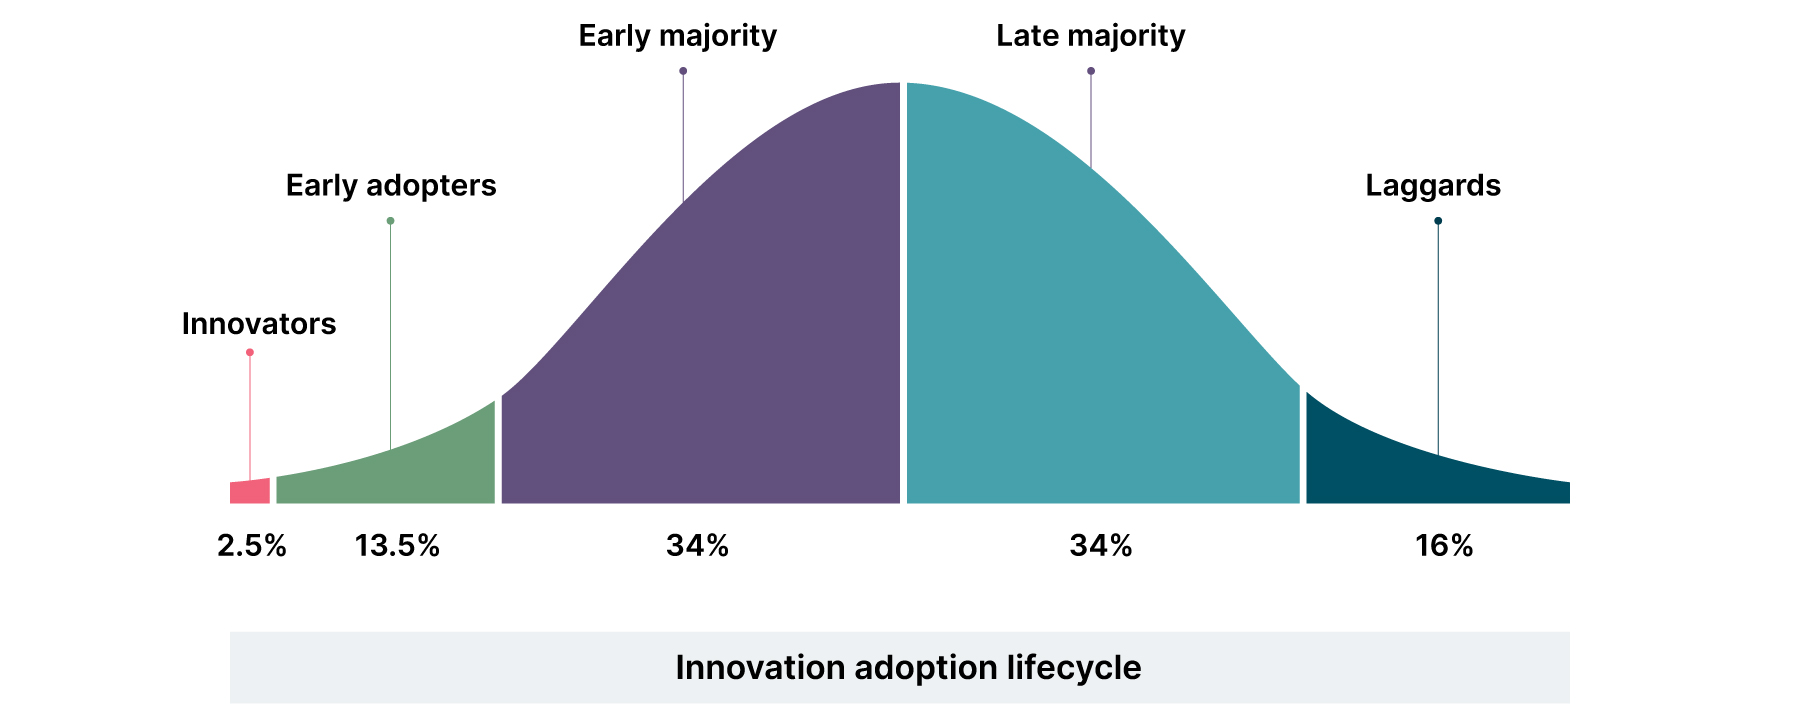 Innovation adoption lifecycle graph. Innovators are 2.5%, early adopters 13.5%, early majority 34%, late majority 34% and laggards 16%